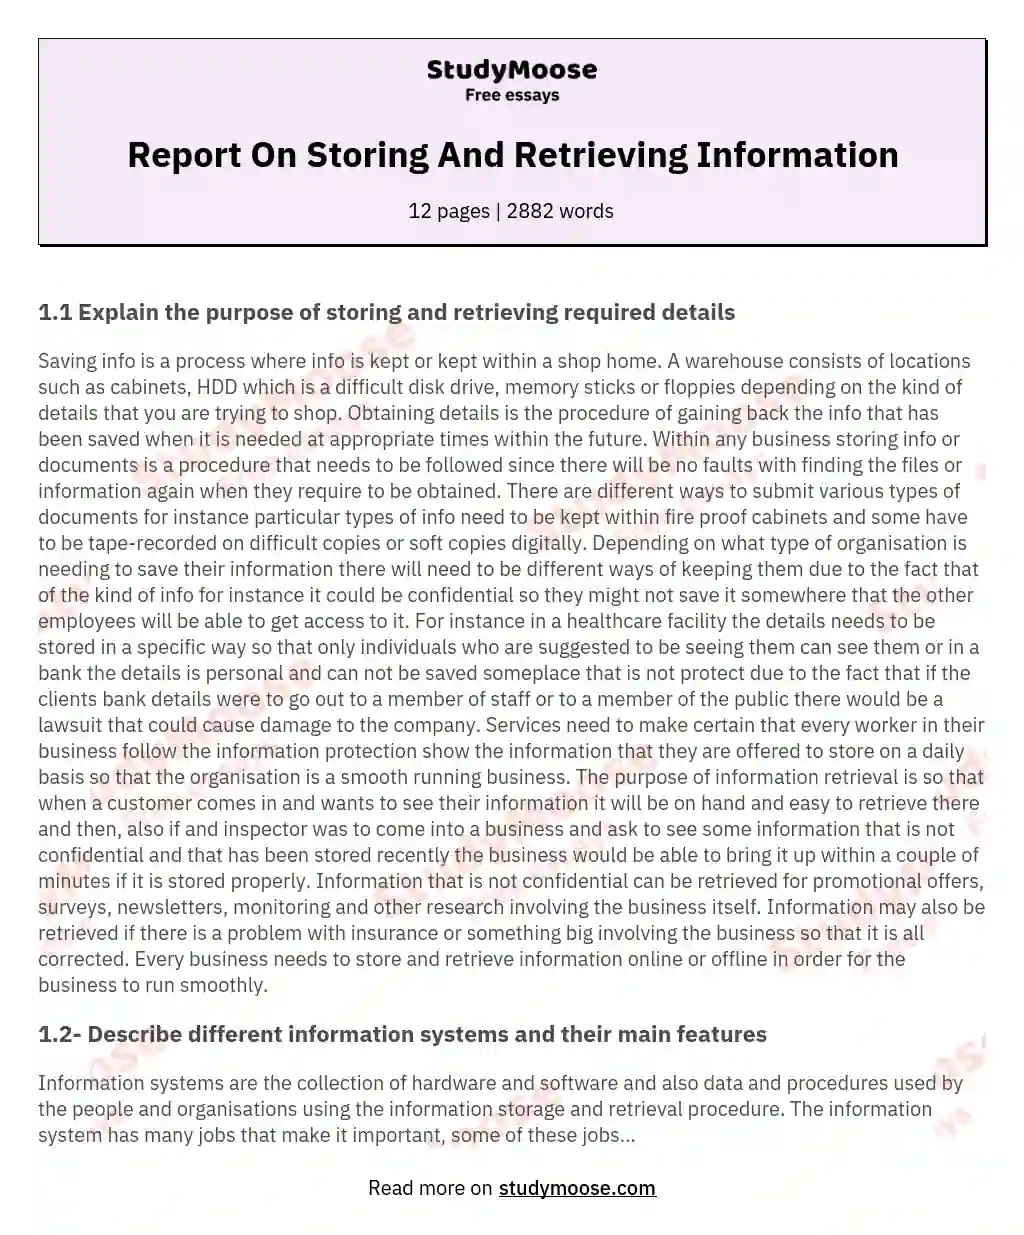 Report On Storing And Retrieving Information essay